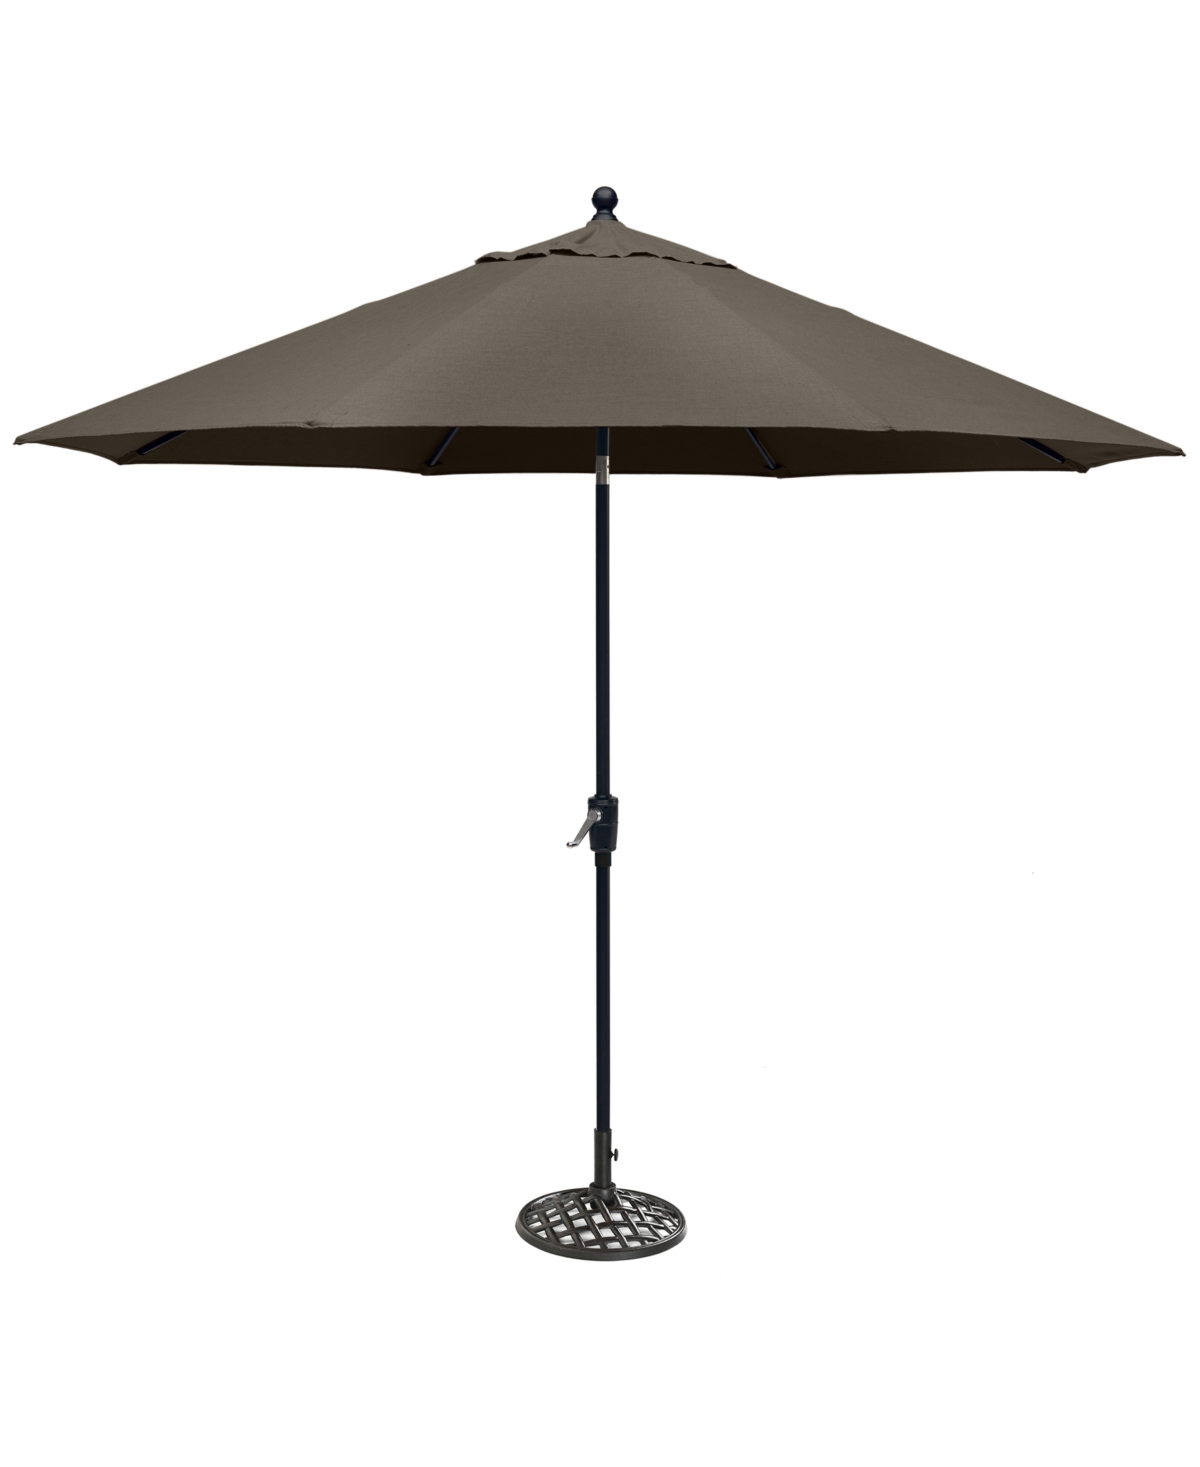 Chateau Outdoor 11 Push Button Tilt Umbrella with Base with Outdoor Fabric, Created for Macys